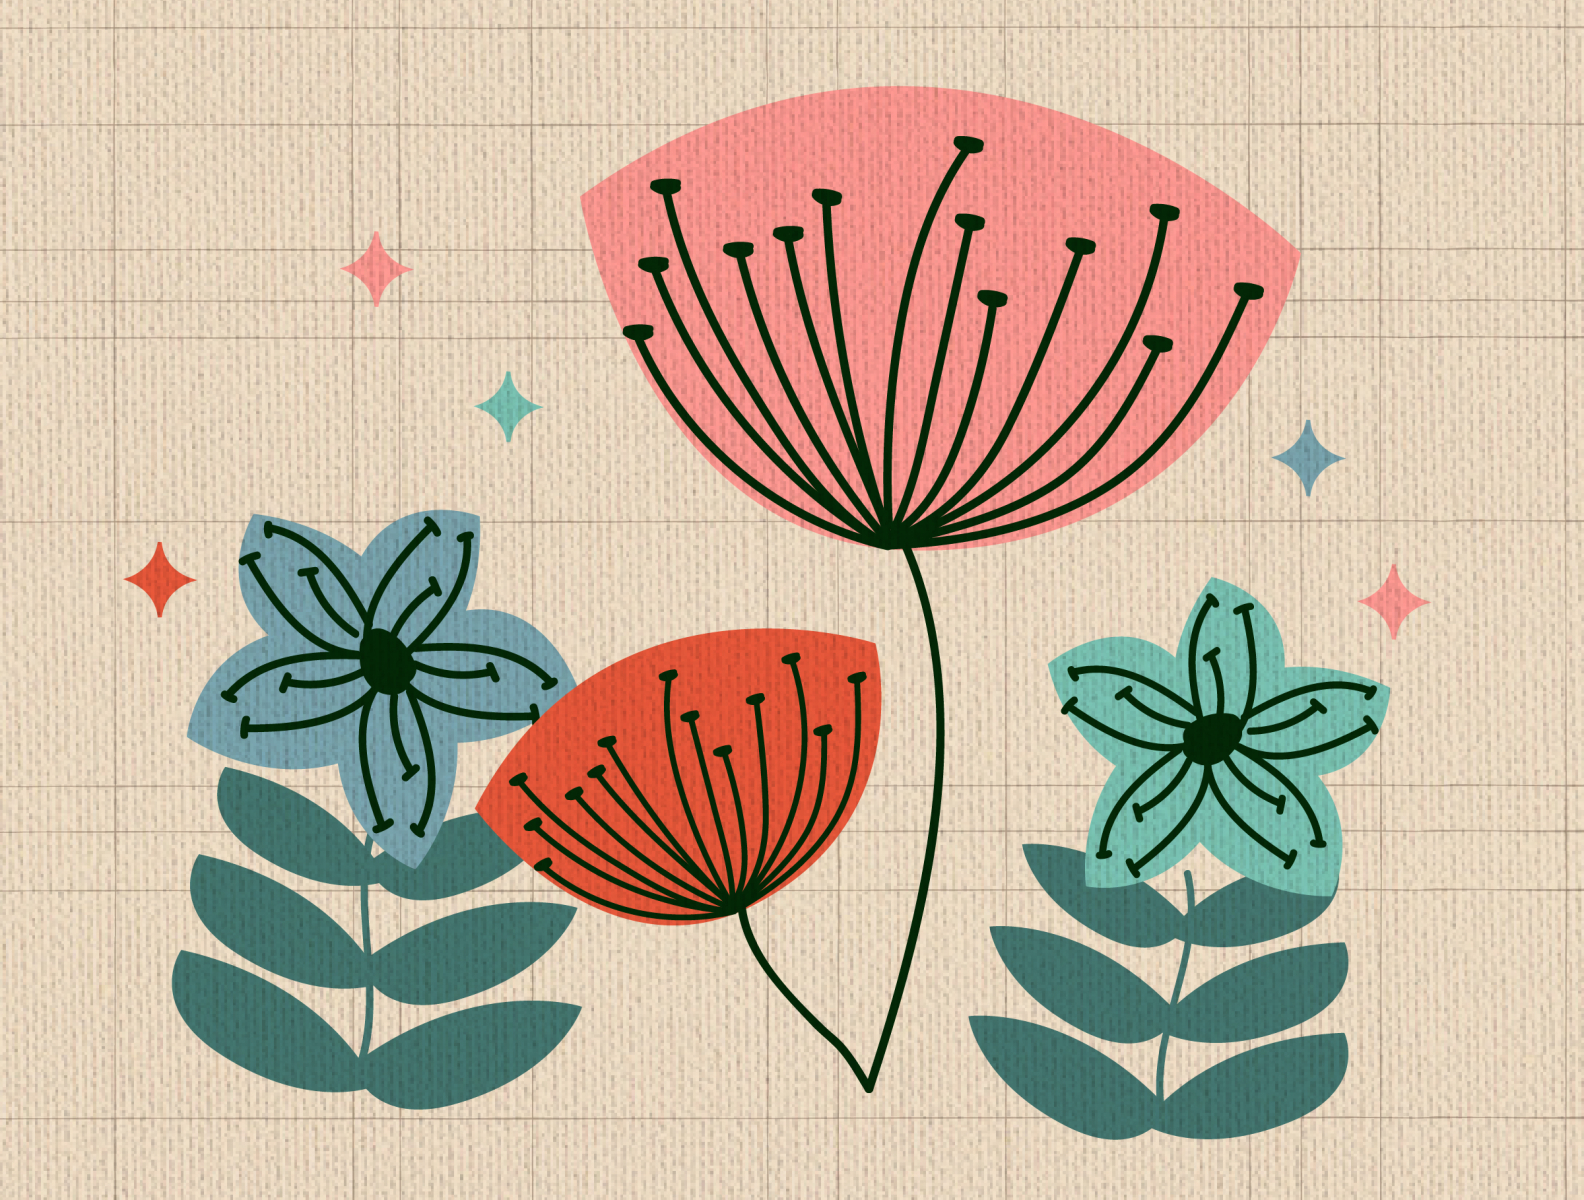 1950s Floral by Megan Dignan on Dribbble